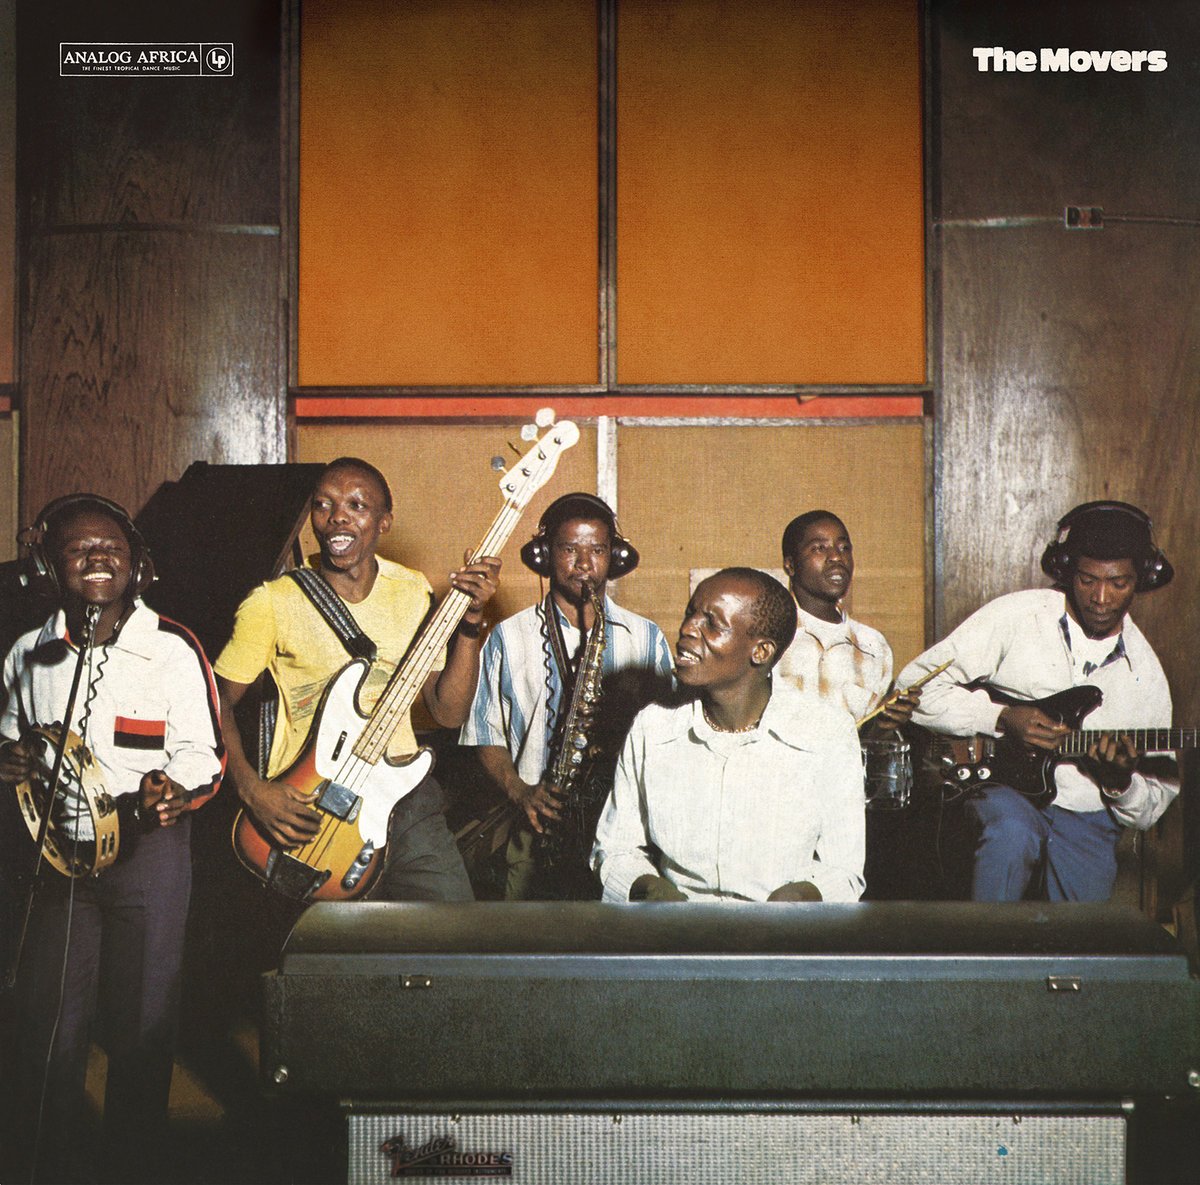 Movers, The "Vol.1 - 1970-1976" (Analog Africa Nr. 35)